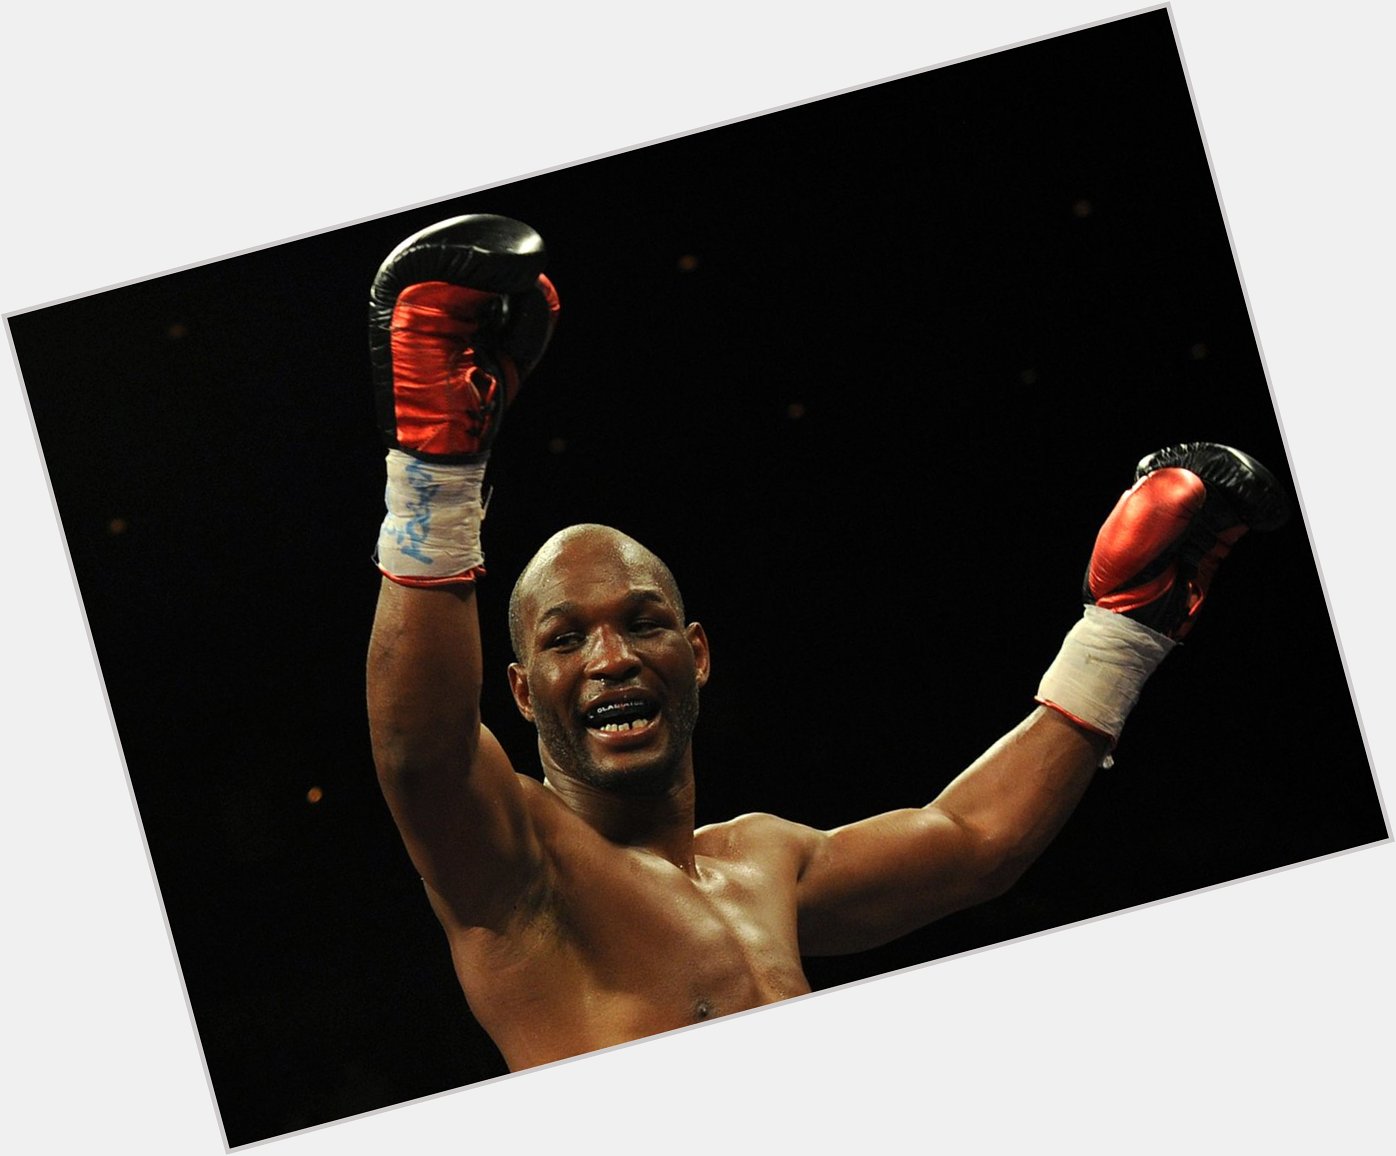 Happy Birthday to the former two-division world champion and Hall of Famer, Bernard Hopkins! 